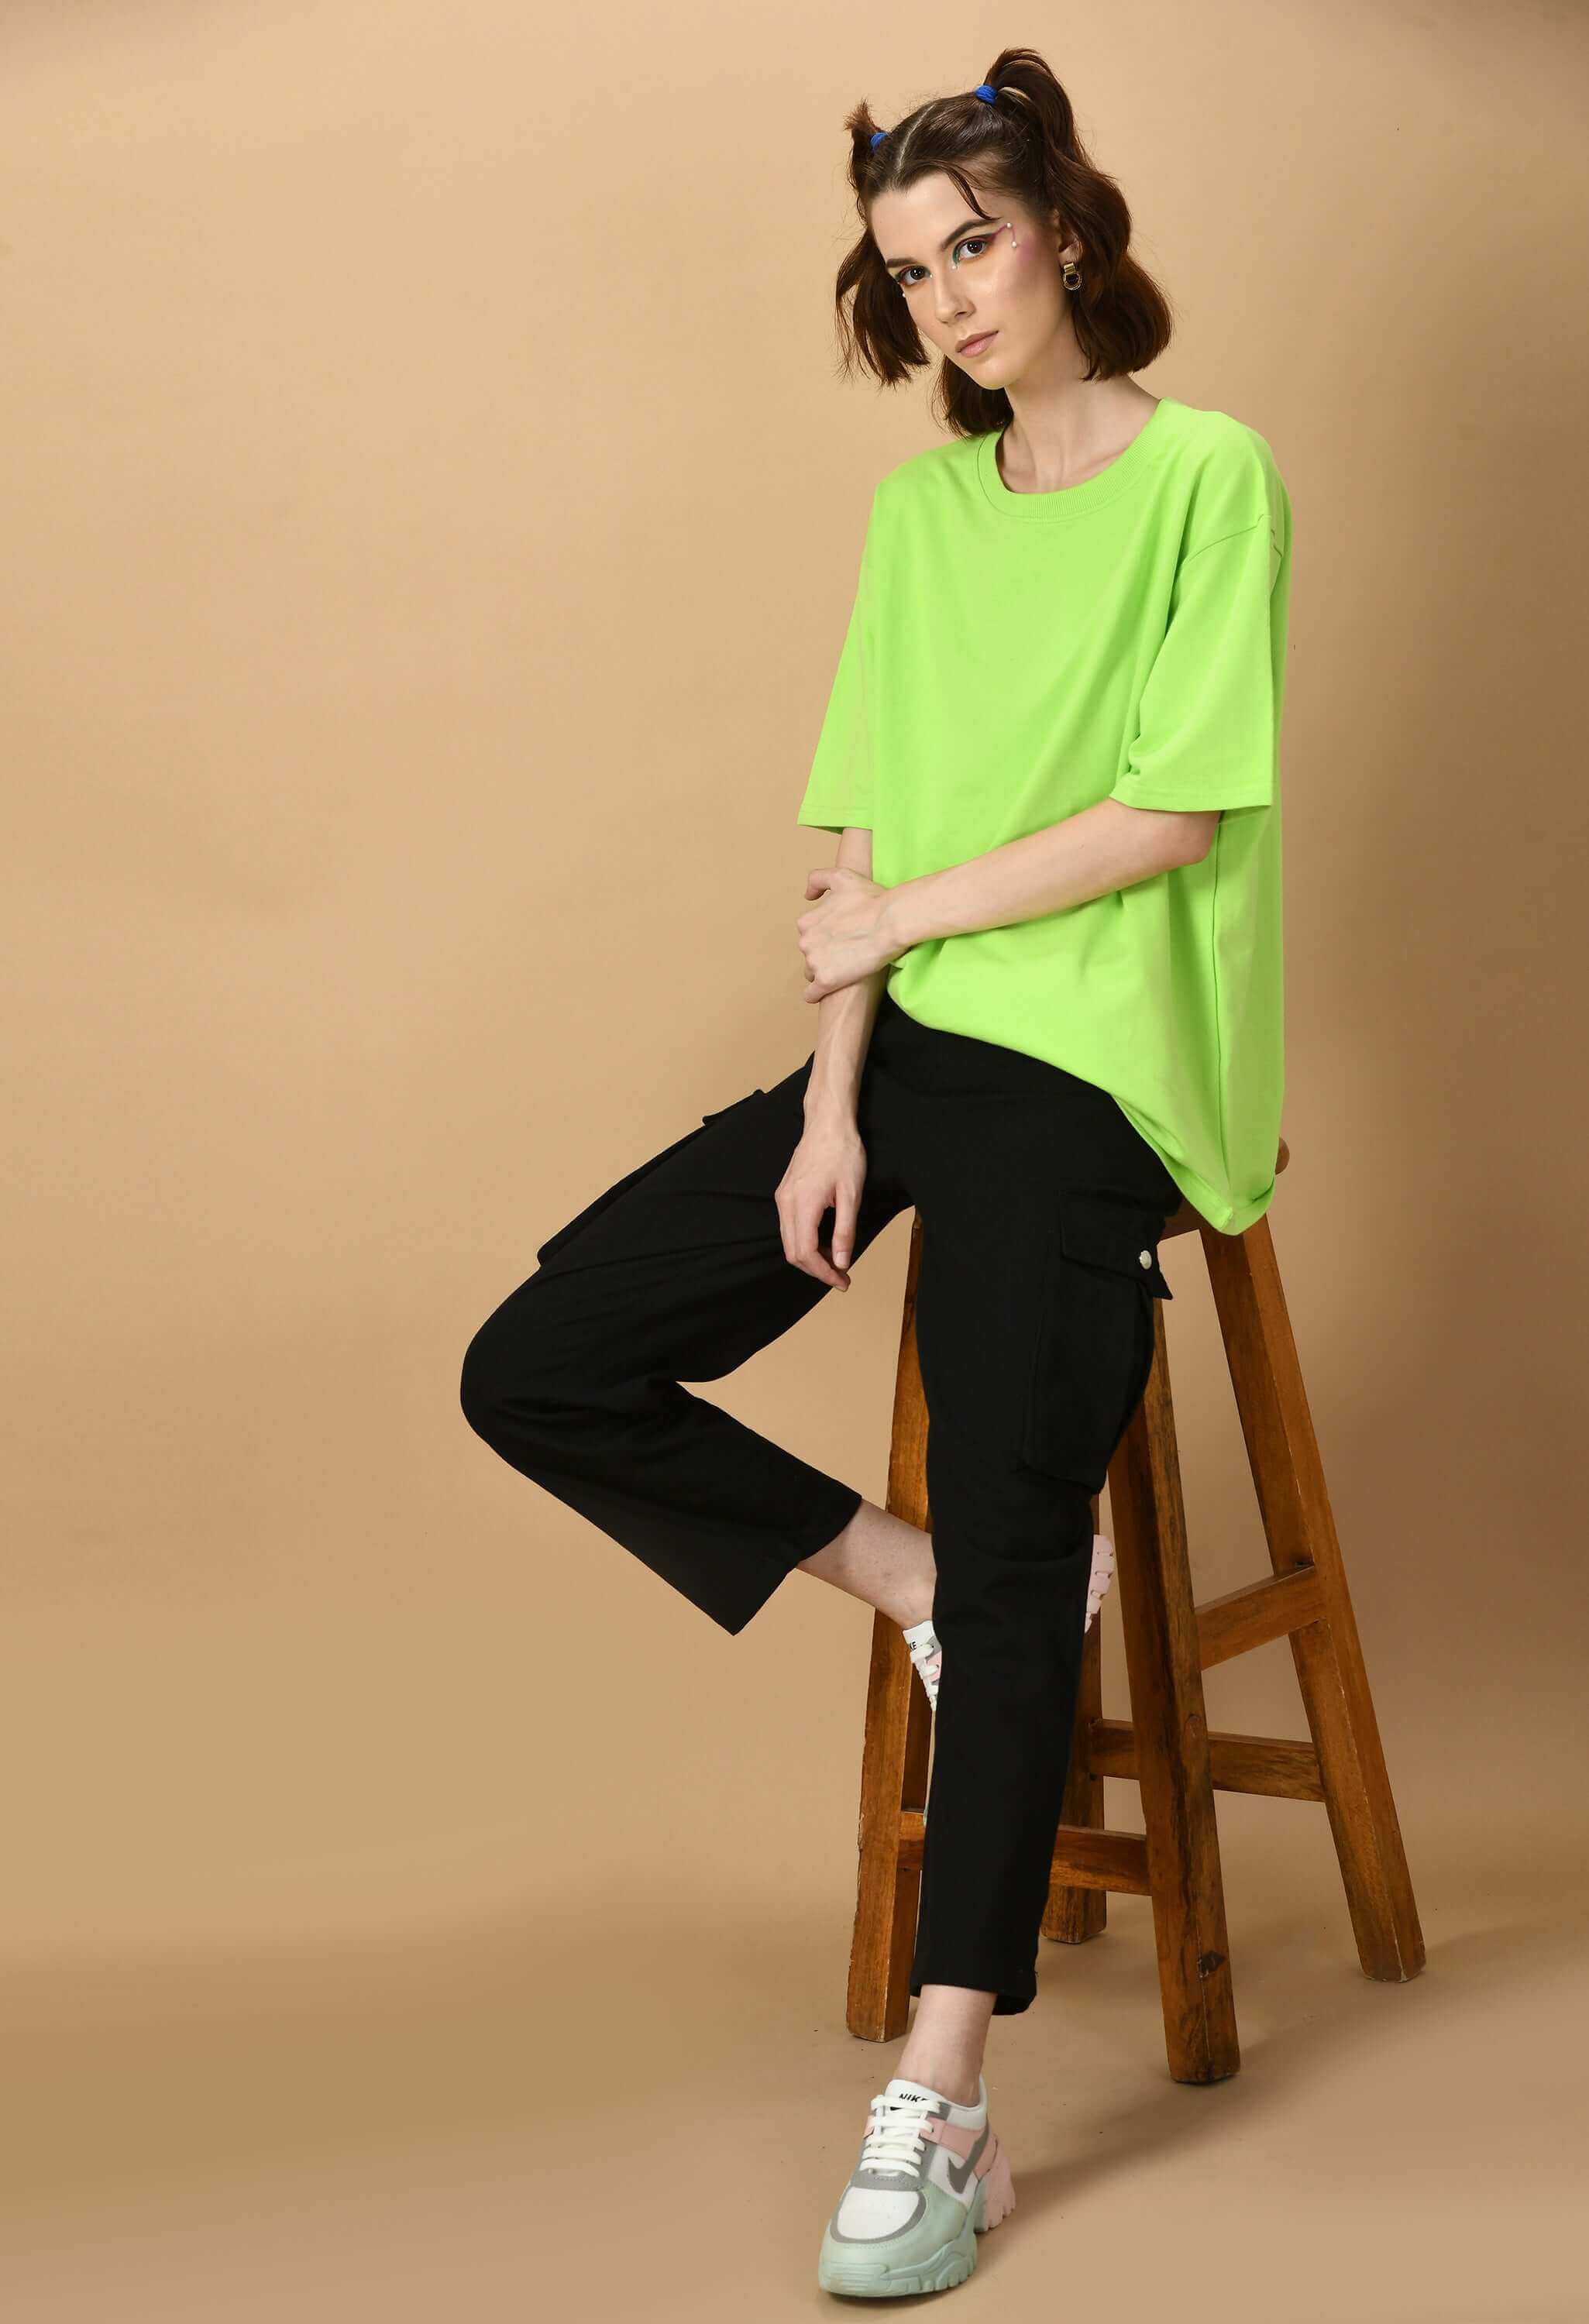 Neon_green_color_plain_women_s_oversized_t-shirt by offmint